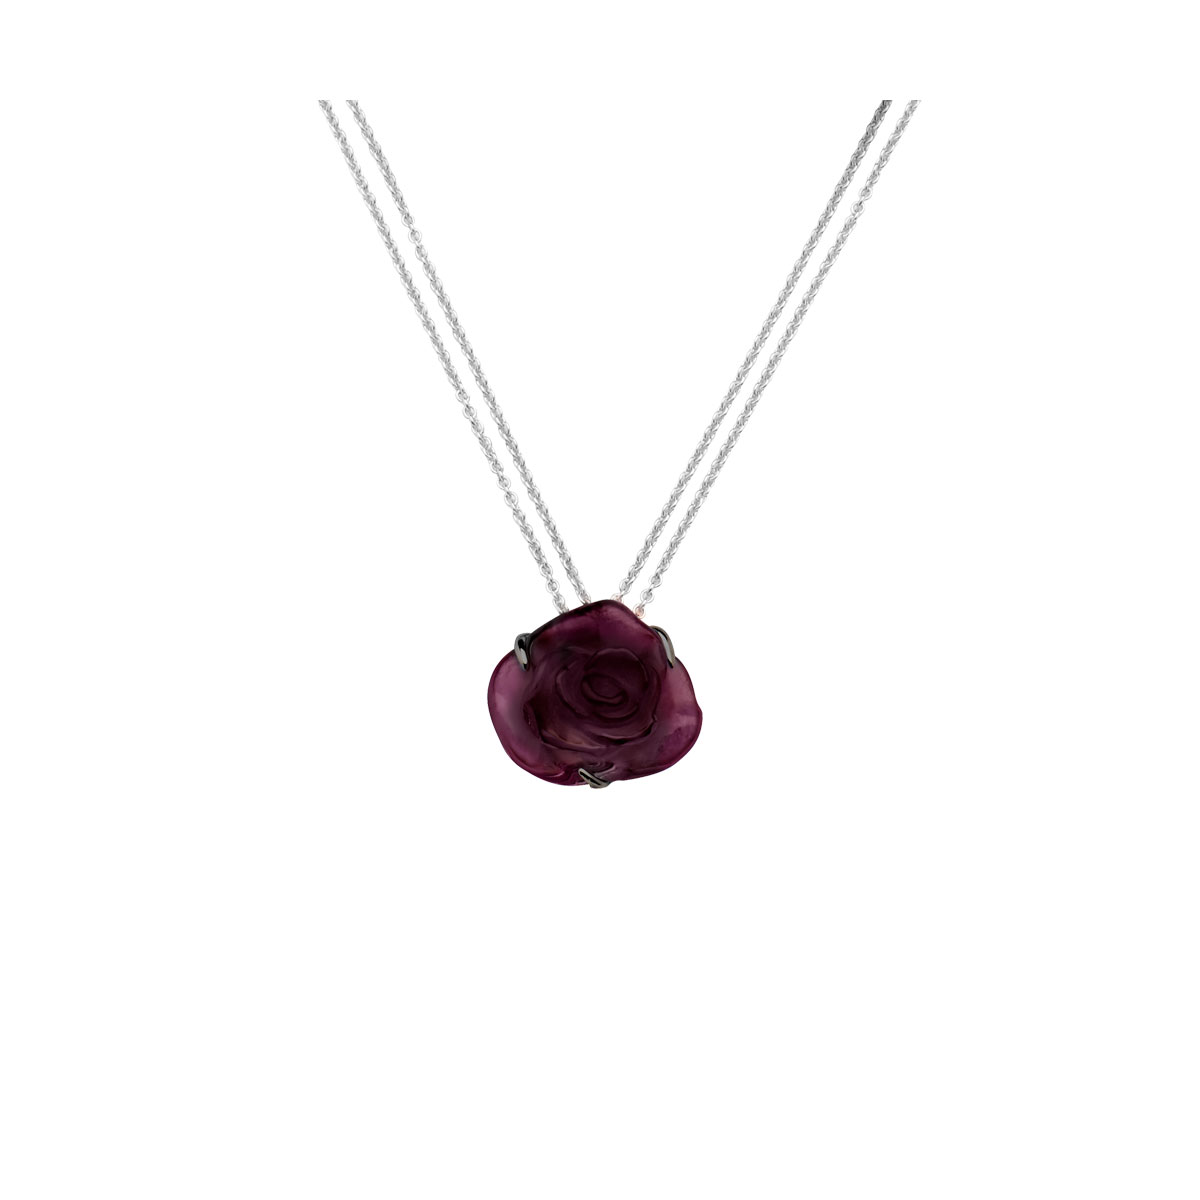 Daum Rose Passion Crystal Necklace in Black